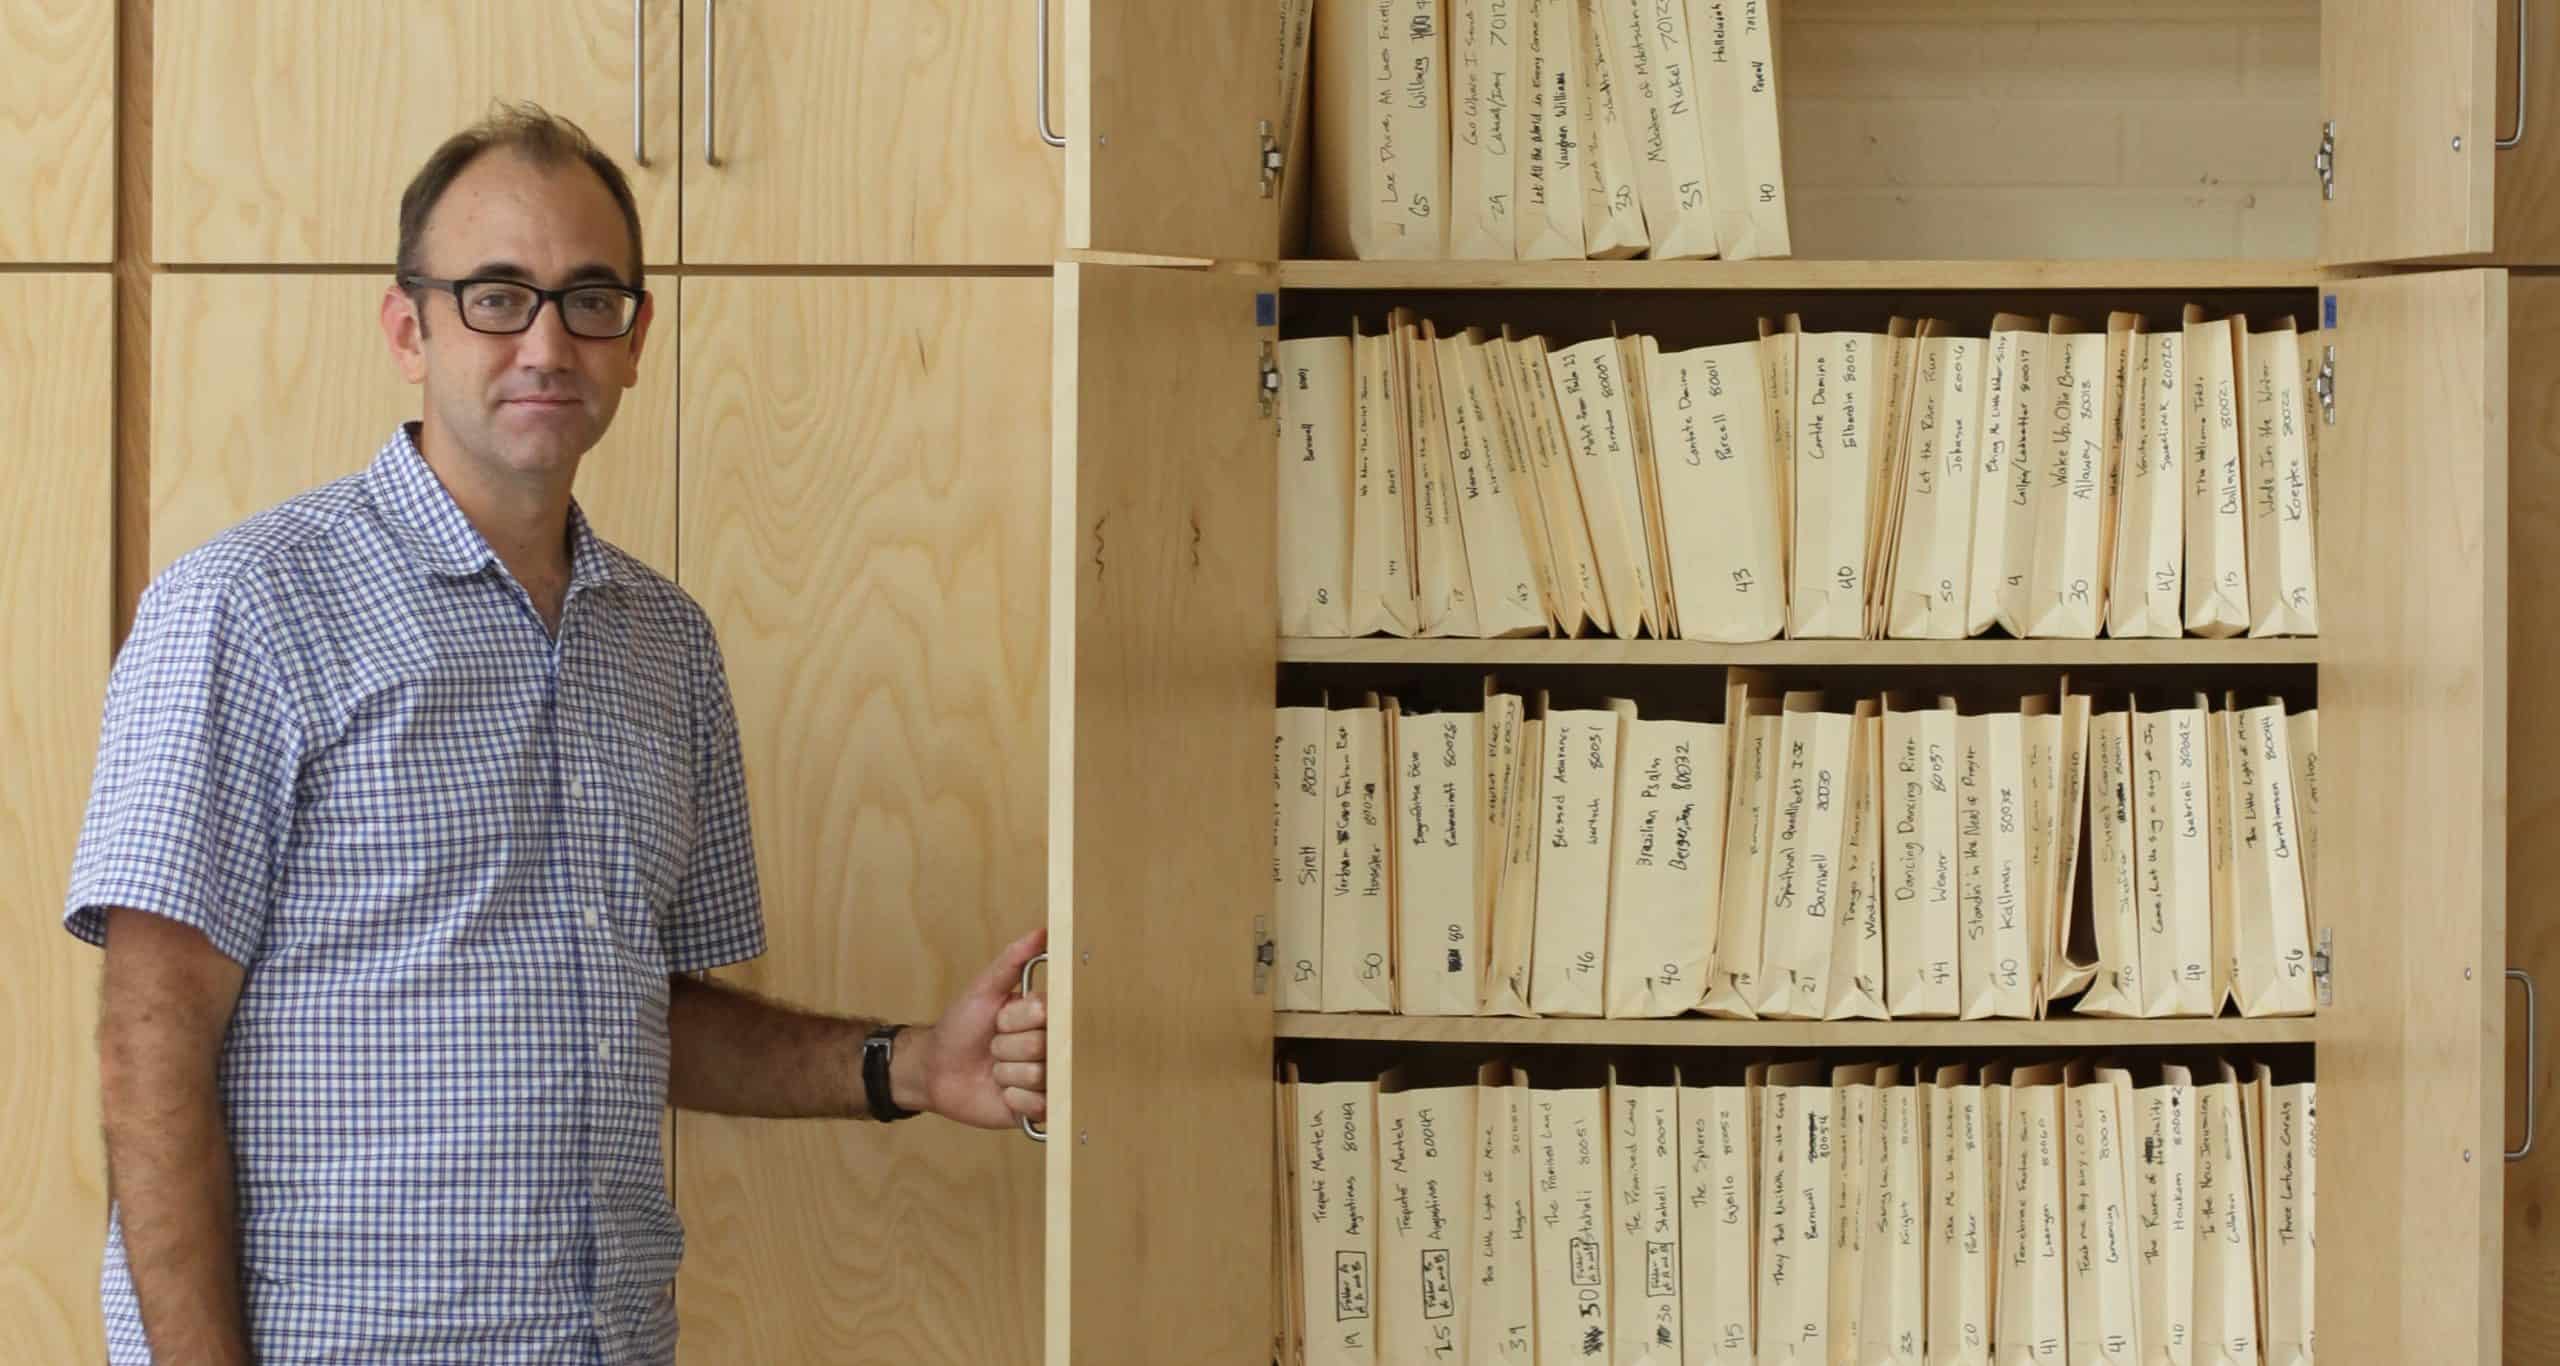 Jared Stutzman, choral director, with one small section of the choral music library of  more than 1,700 pieces, in new shelving